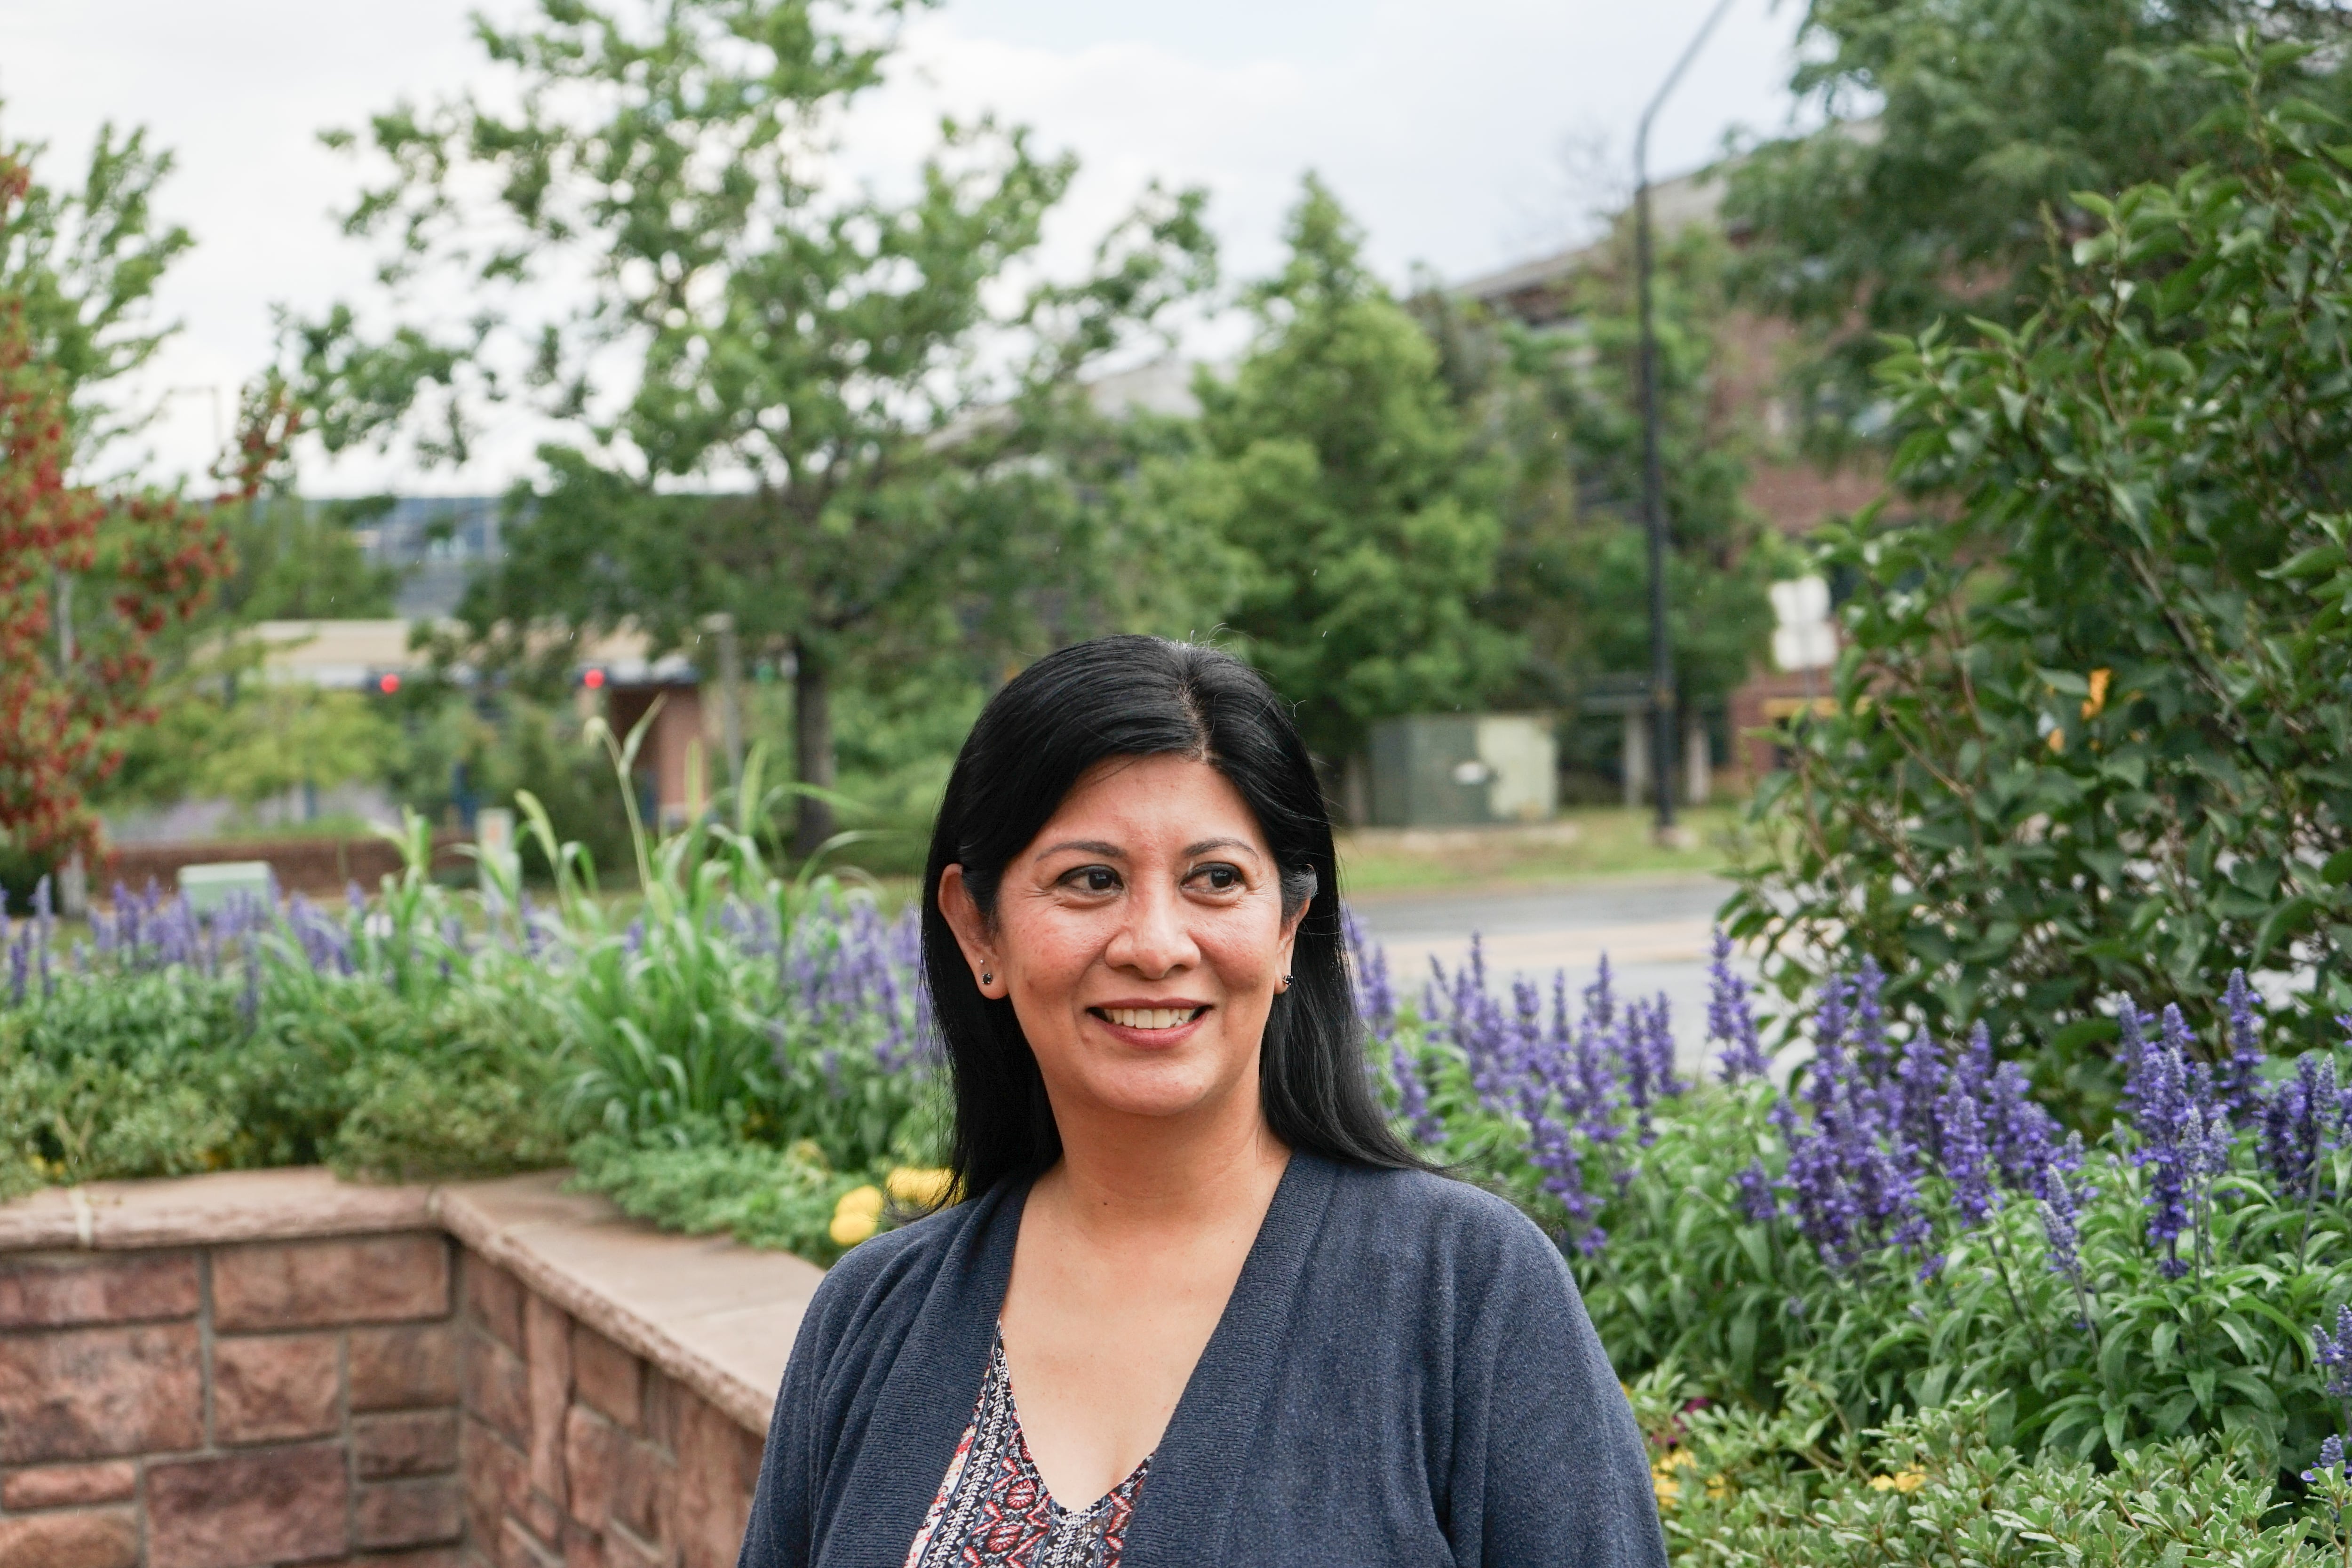 A woman with shoulder-length dark hair poses for a portrait outside a building. She’s in a park-like setting with lots of purple flowering plants around her.